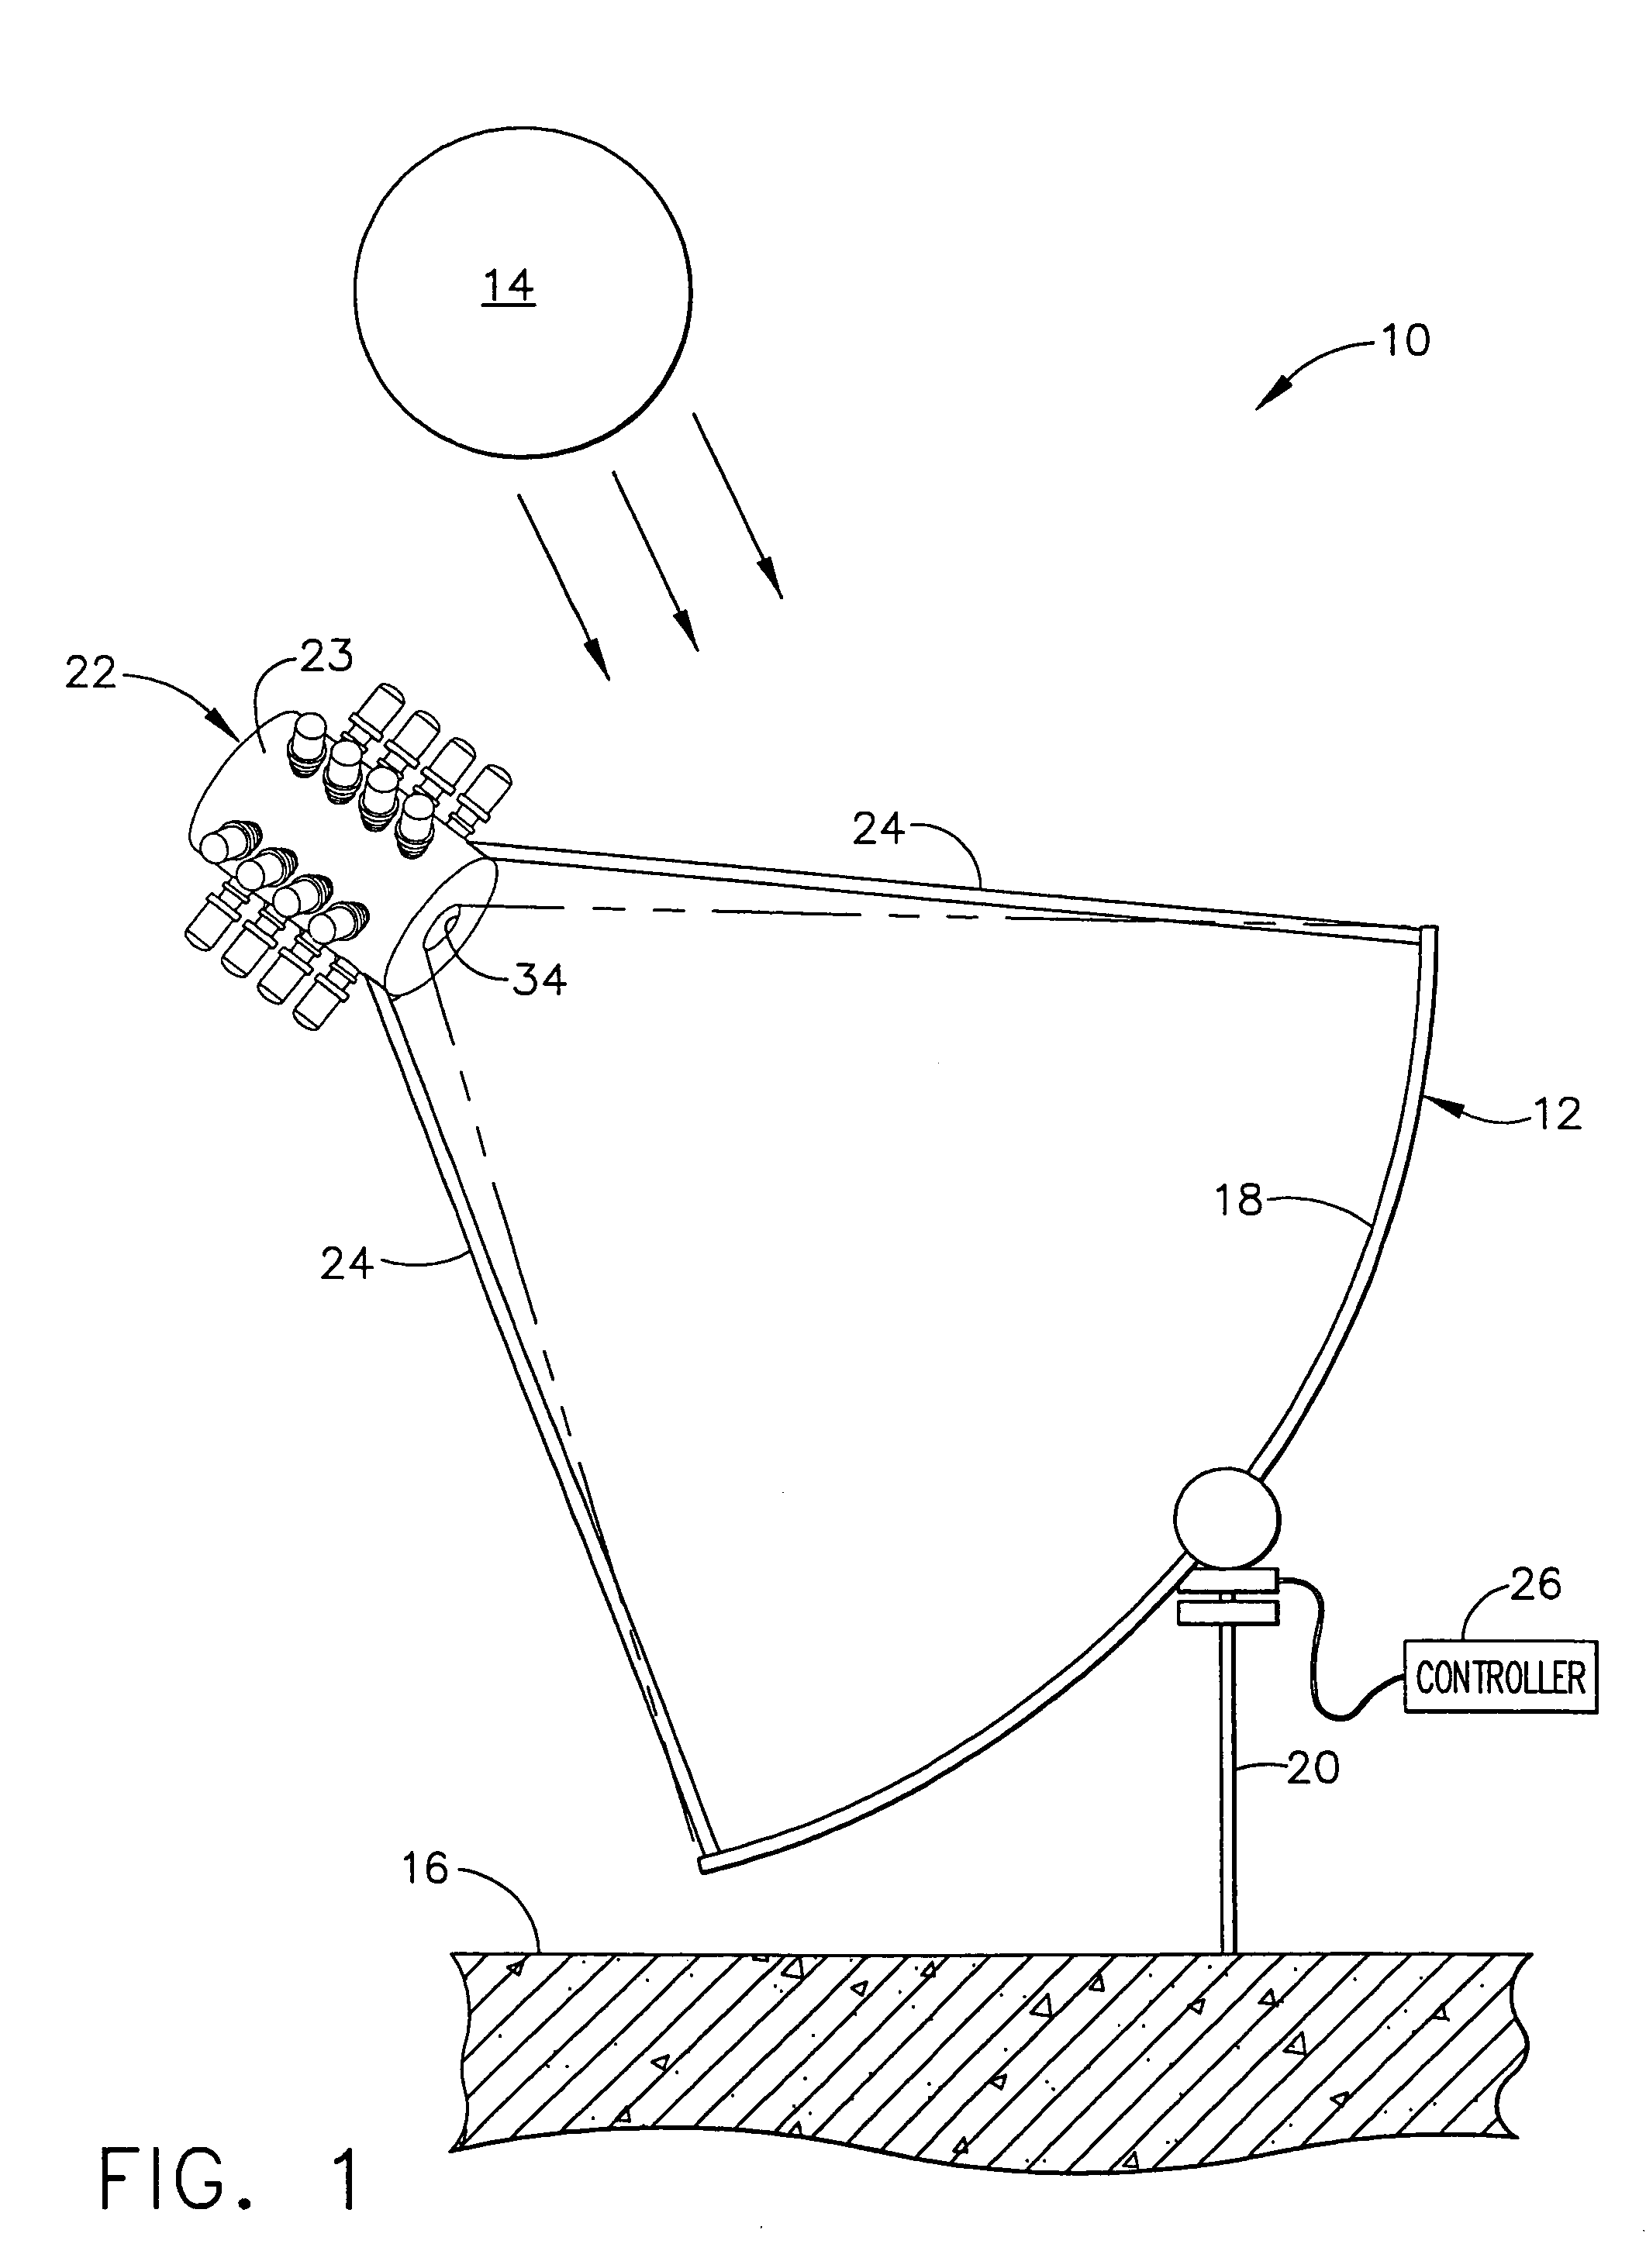 Method and apparatus for solar power conversion